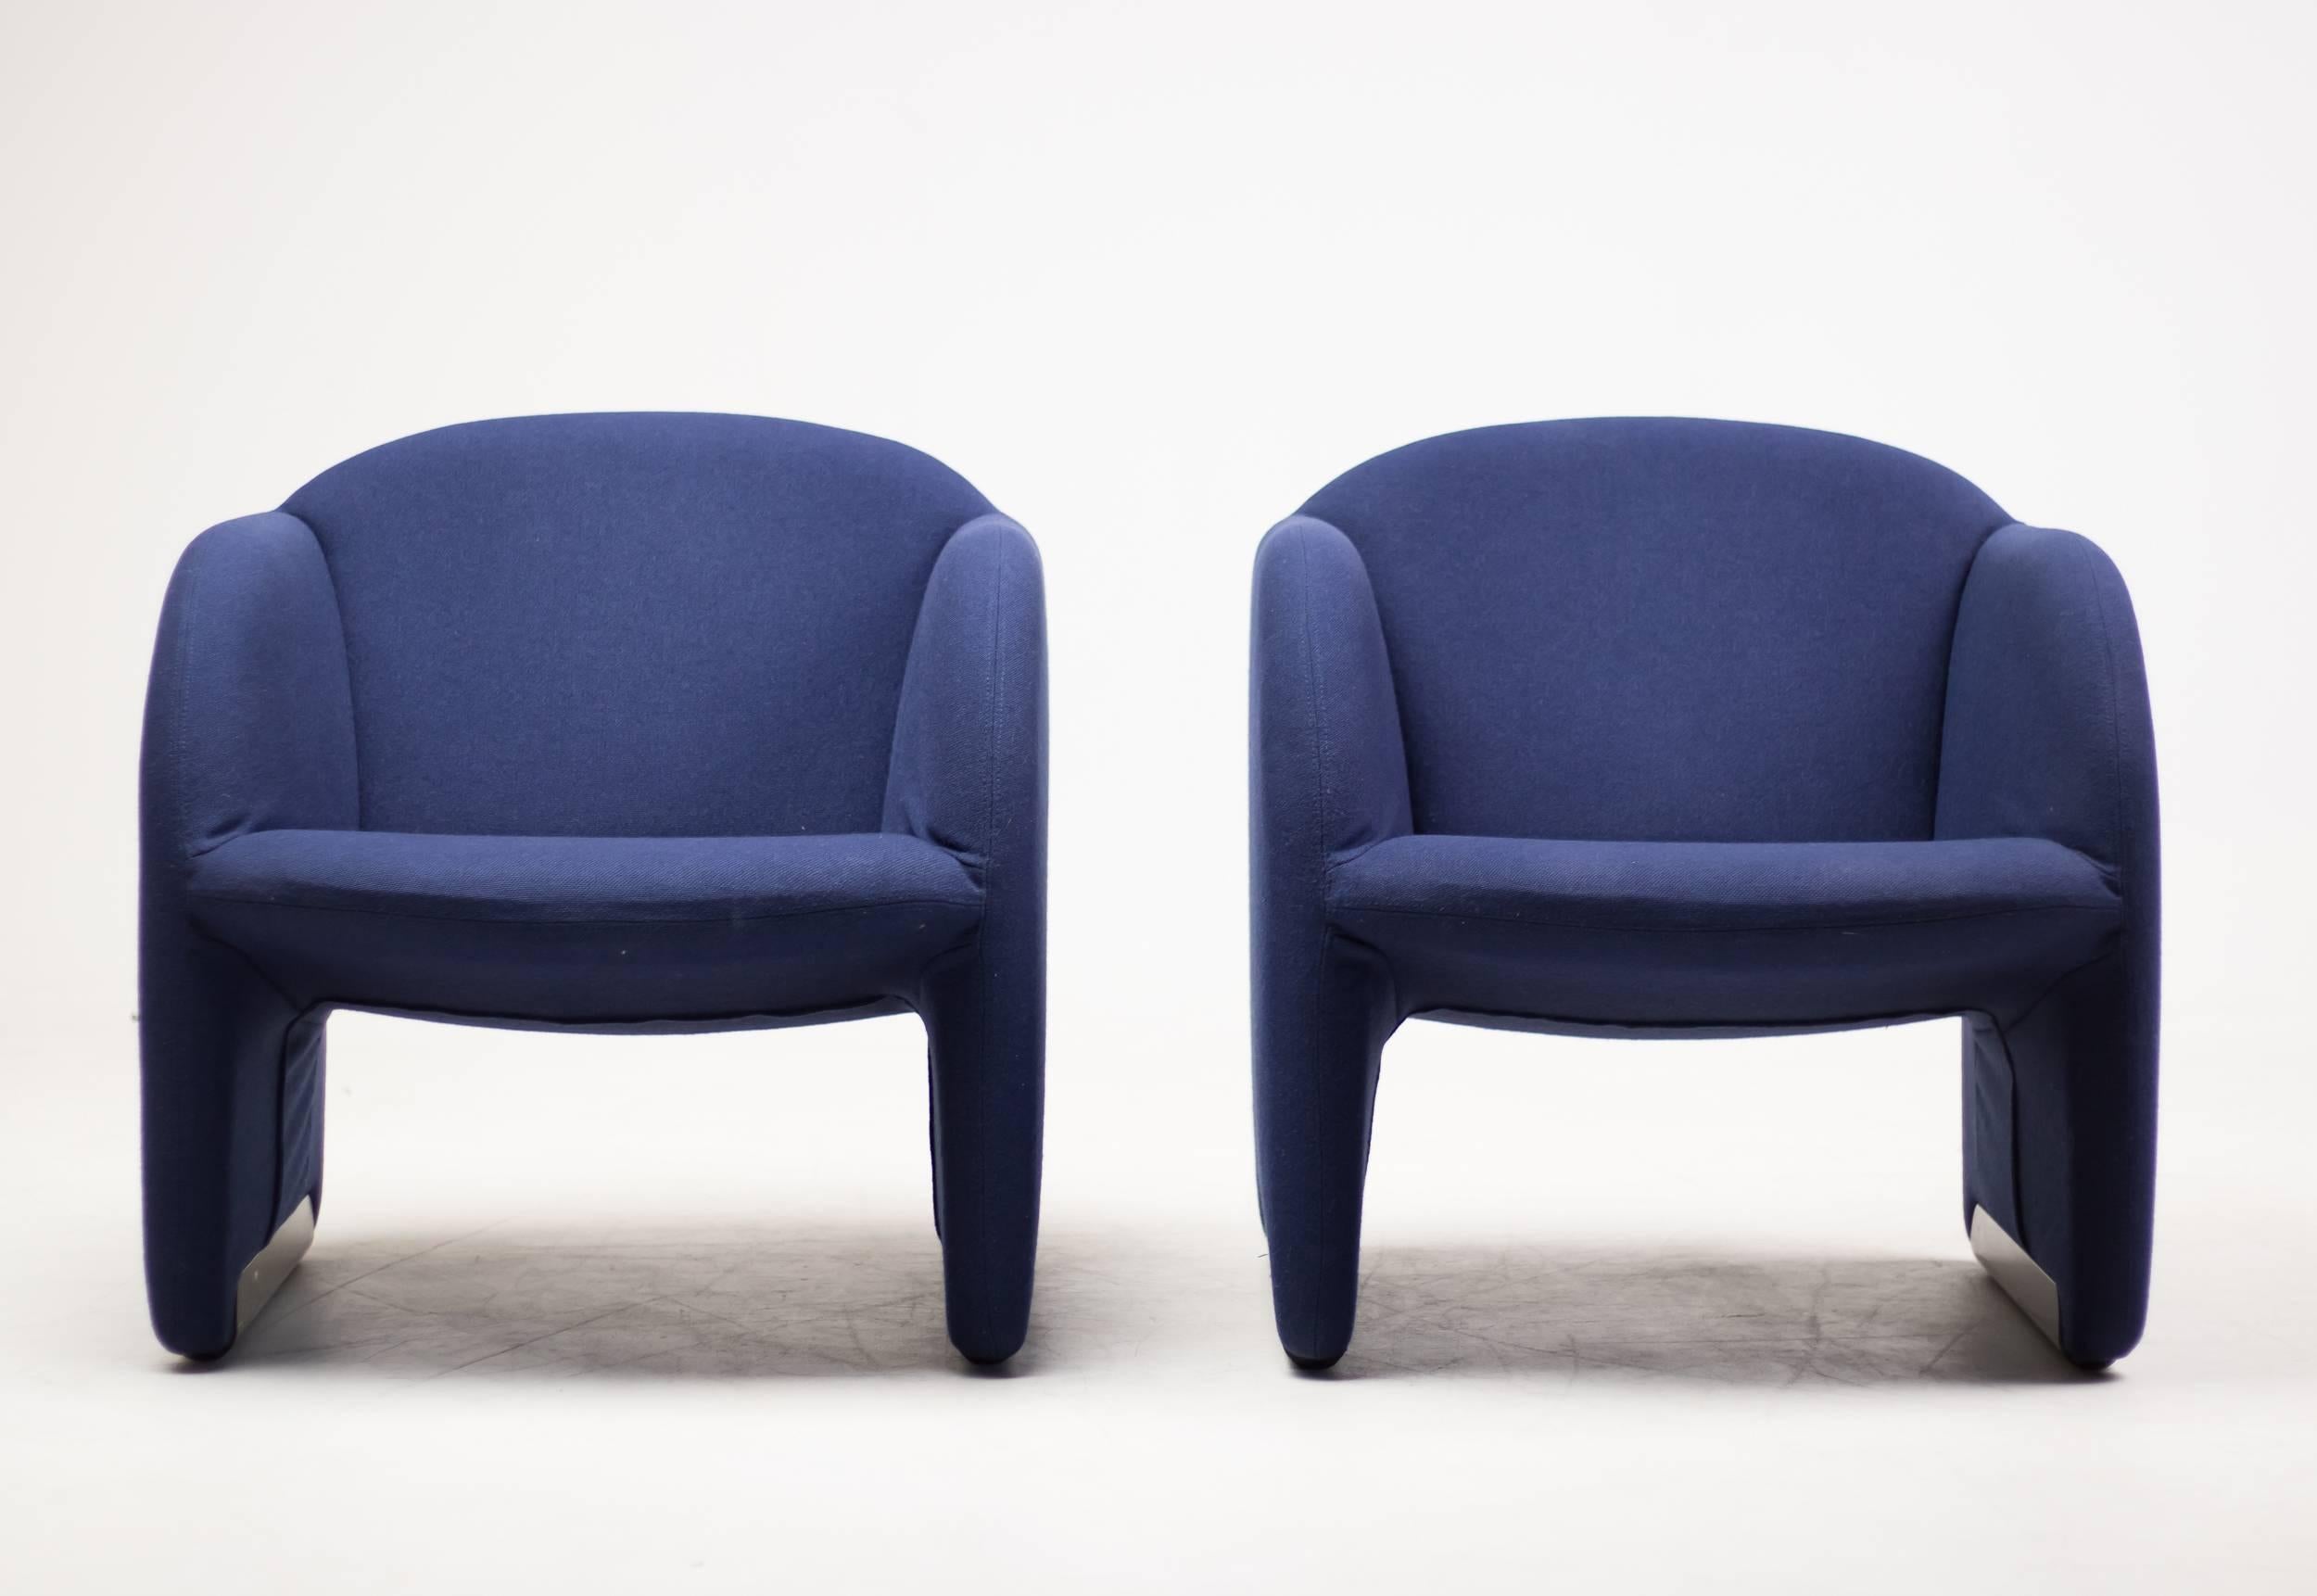 Set of two Ben armchairs a dark blue woolen fabric.
In the late 1960s and early 1970s French designer Pierre Paulin created several sculptural masterpieces for Dutch manufacturer Artifort.

Excellent fast and affordable worldwide shipping.
White